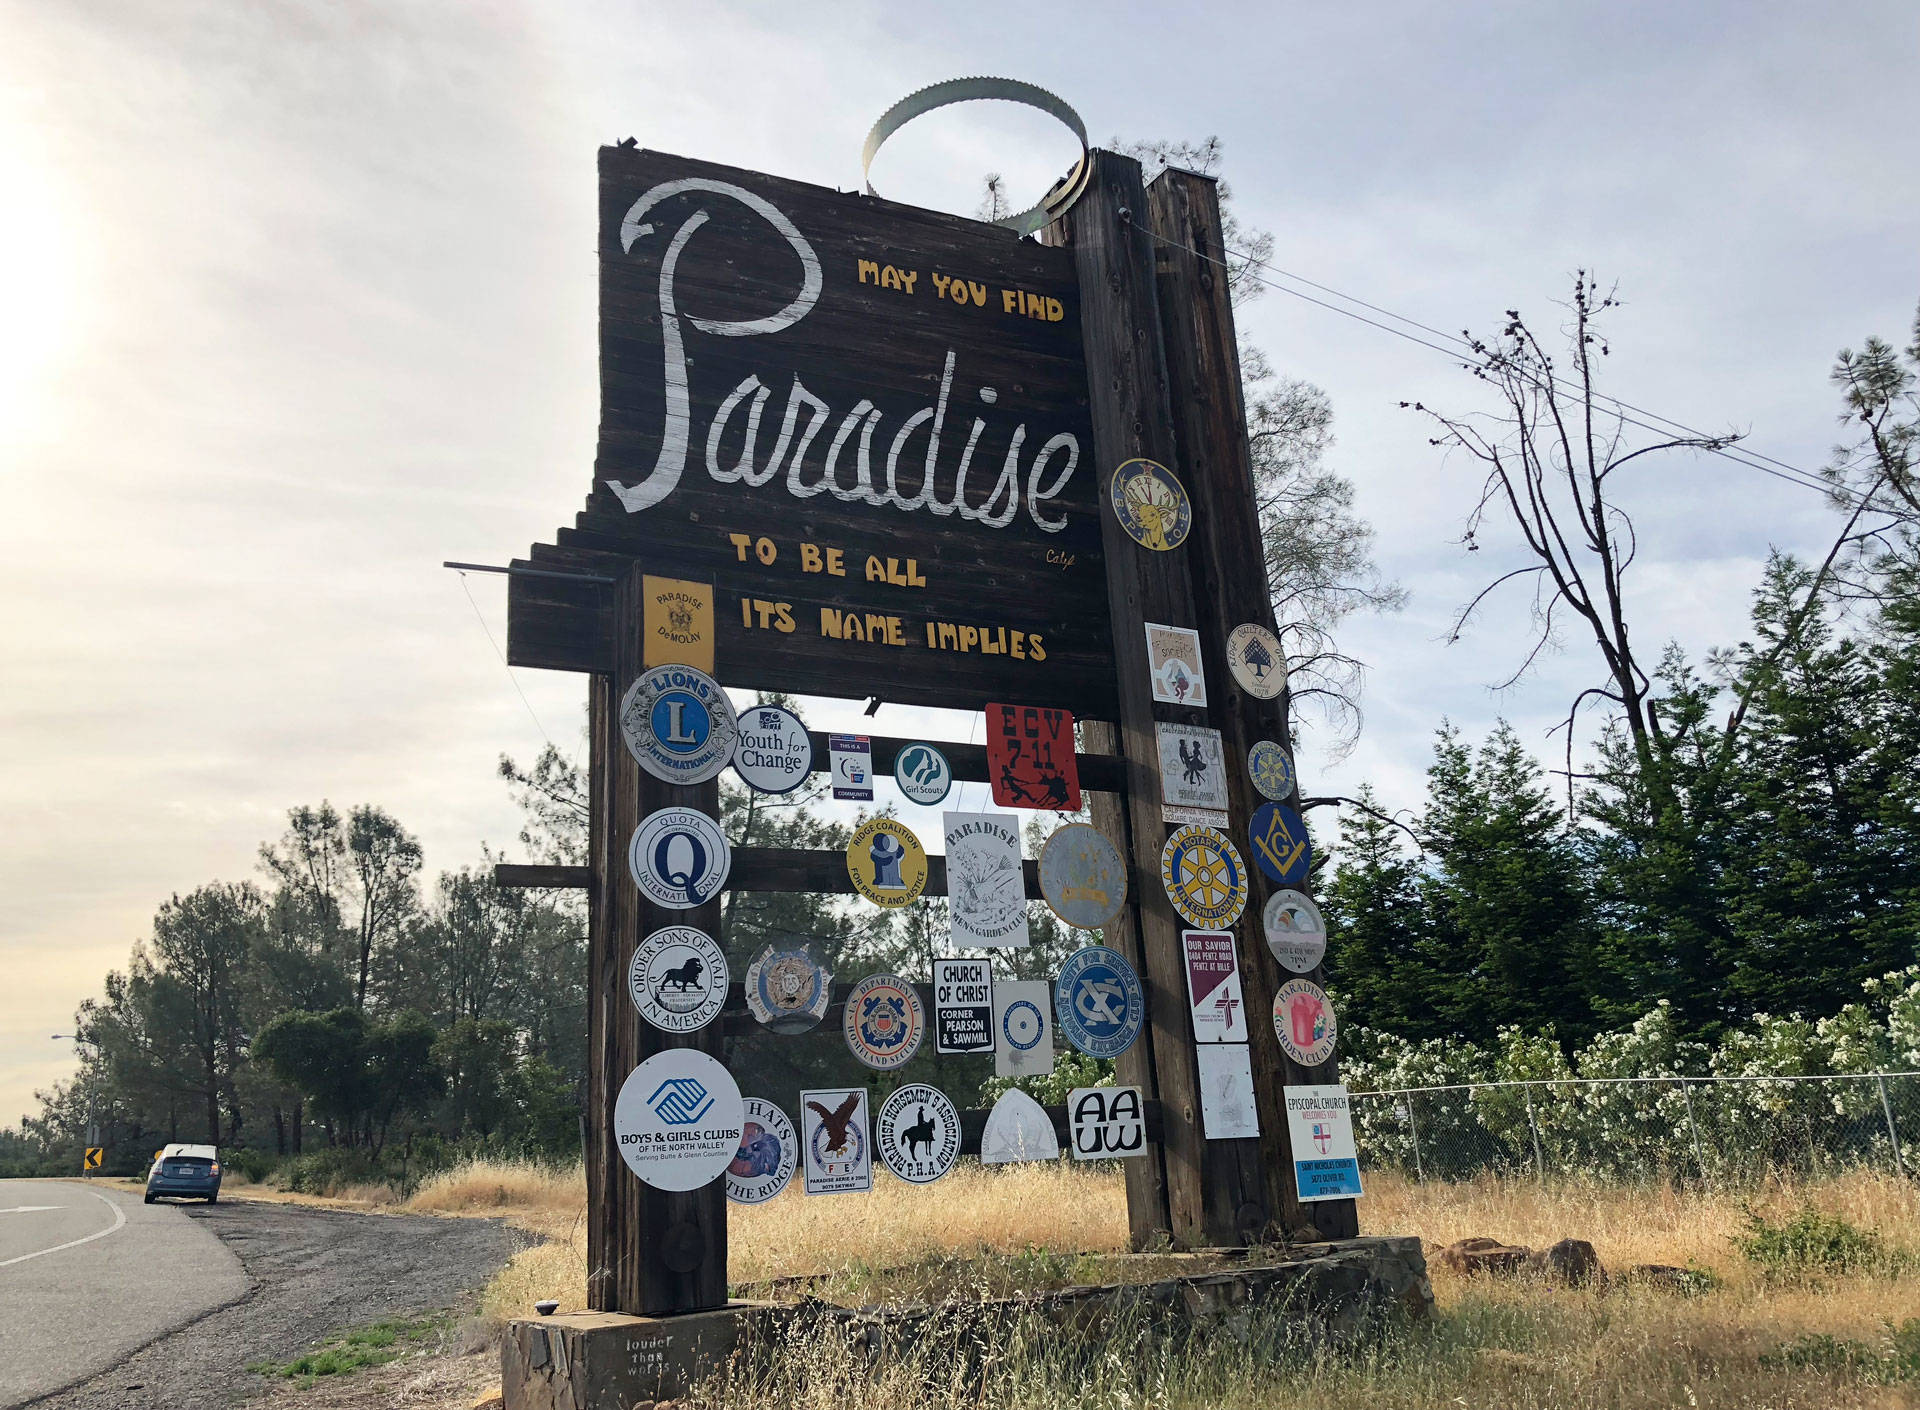 The sign that welcomed those driving into Paradise read, "May you find Paradise to be all its name implies." That sign burned down this week. Laura Klivans/KQED